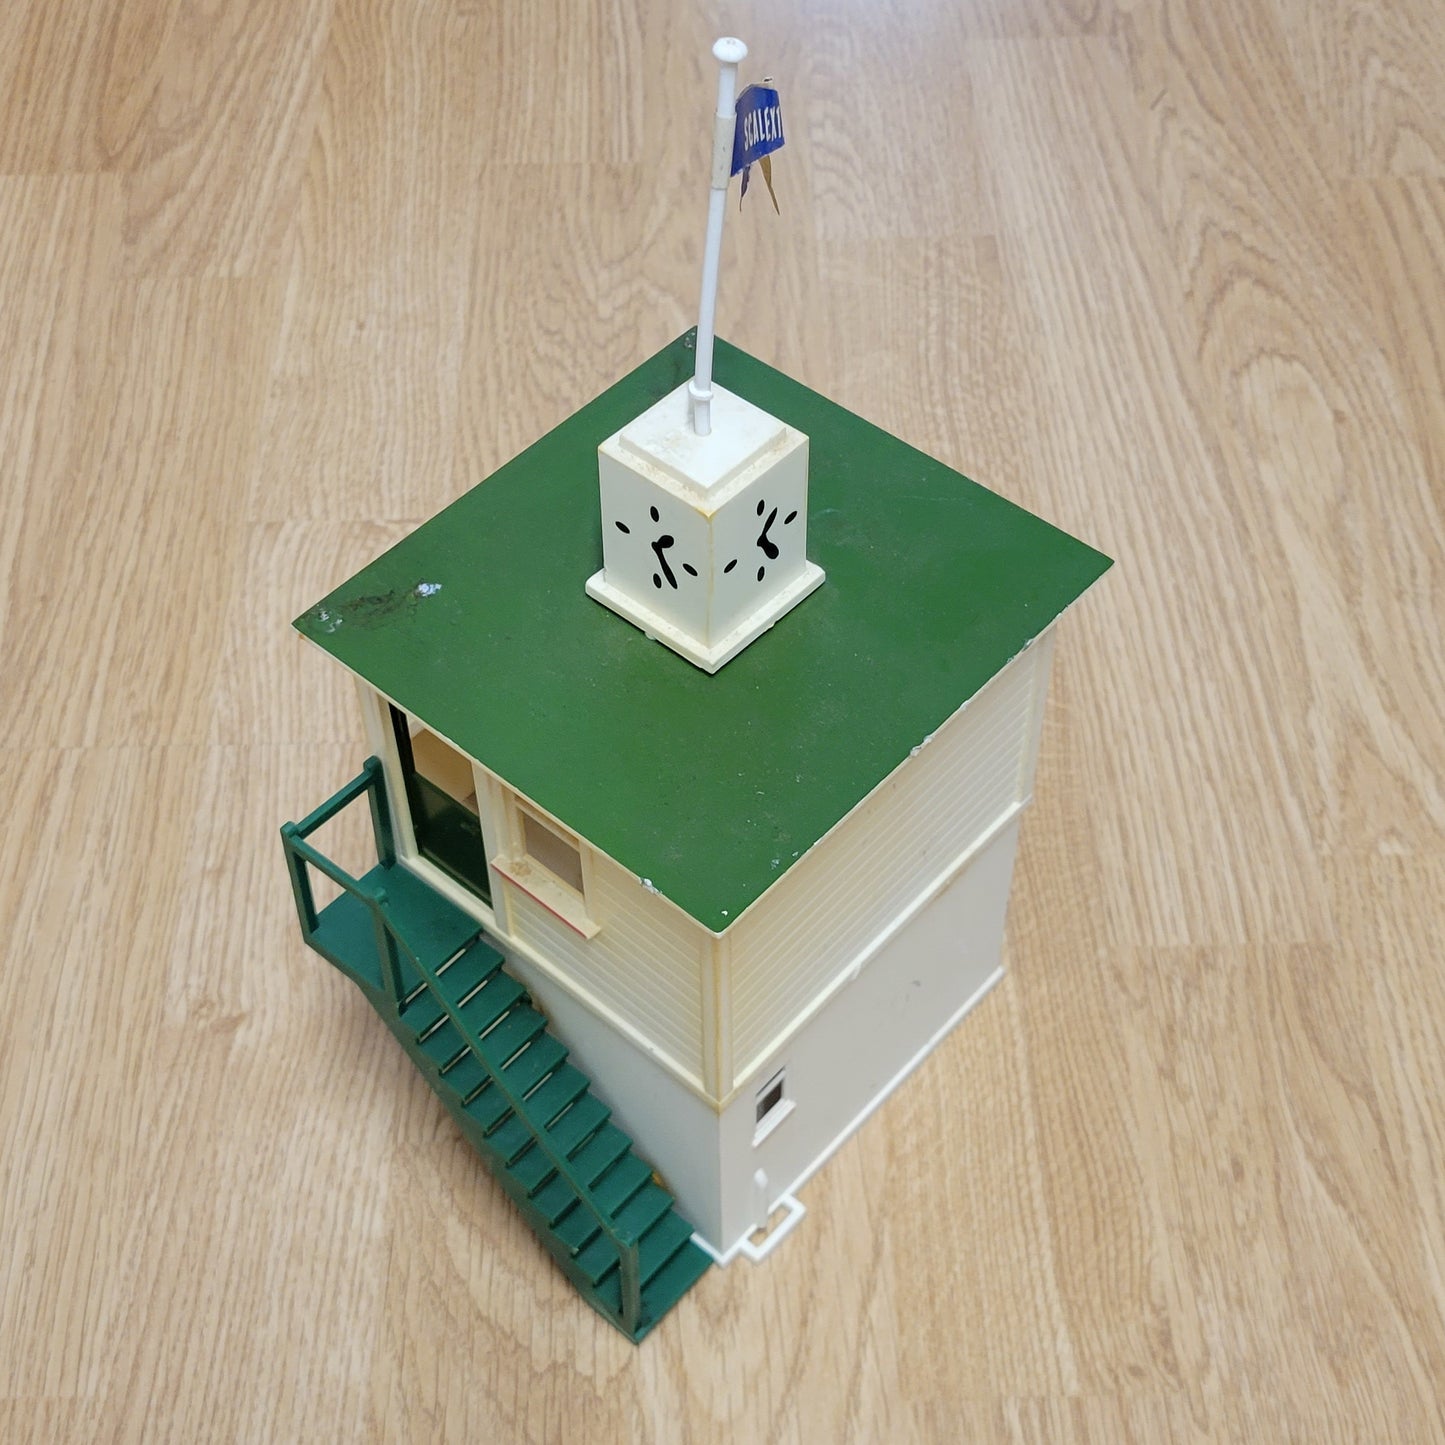 Scalextric 1:32 Building - C702 Control Tower